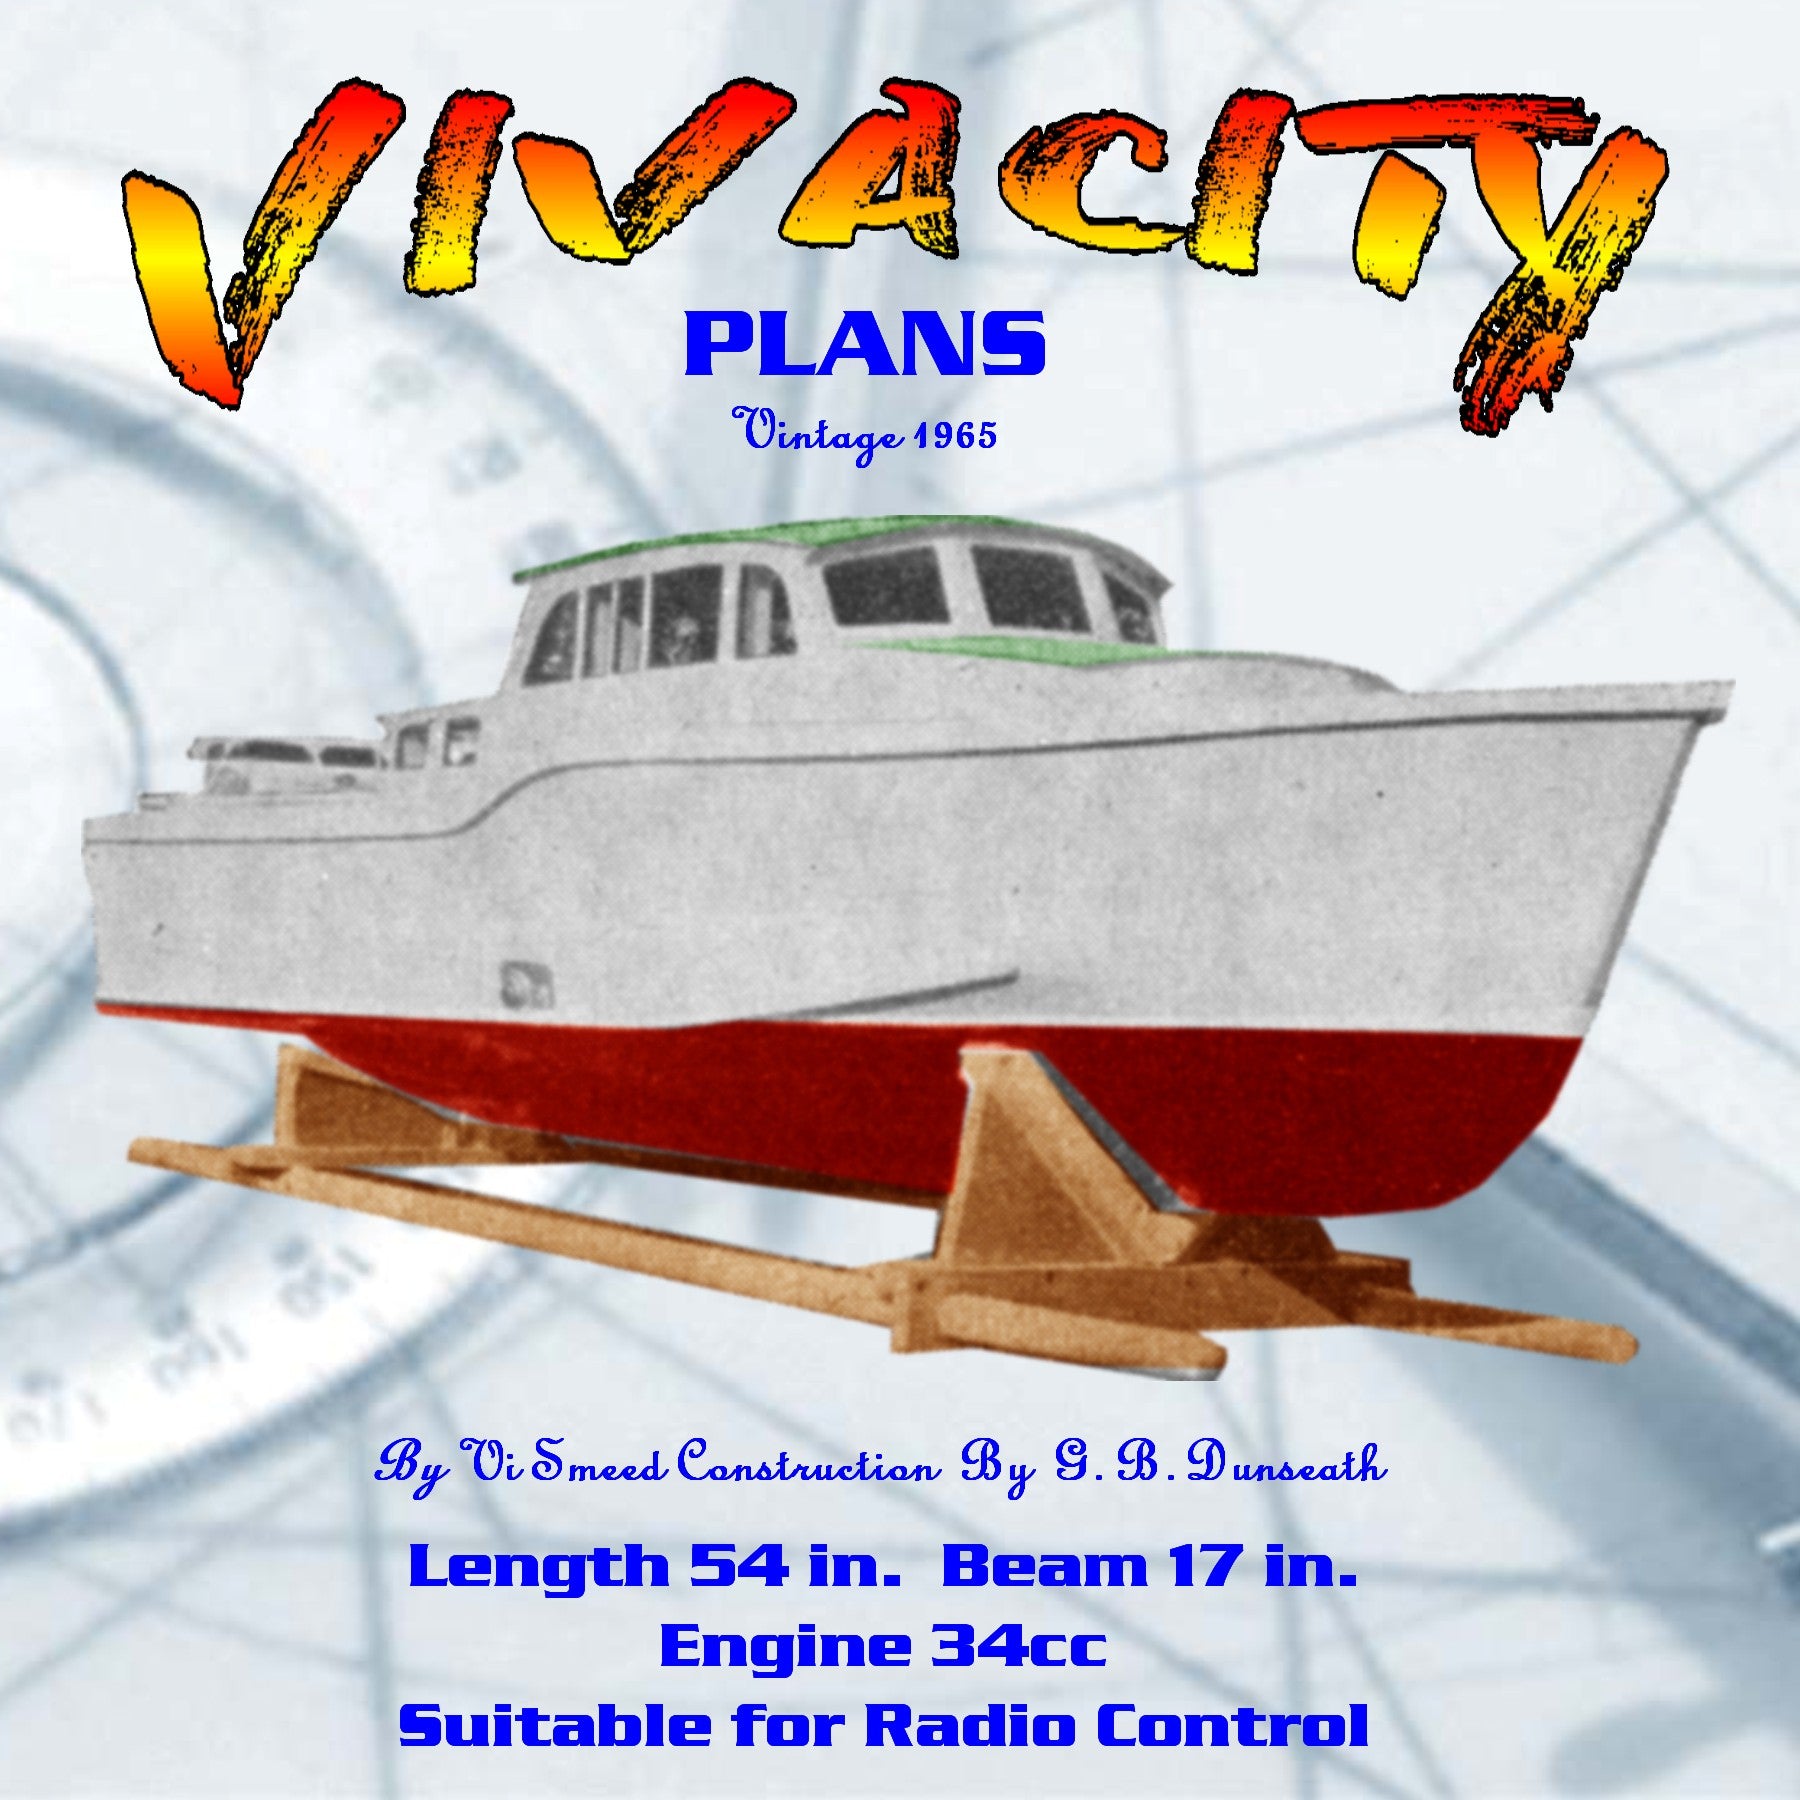 full size printed plan vintage 1965 length 54 in.  beam 17 in. "vivacity" suitable for radio control